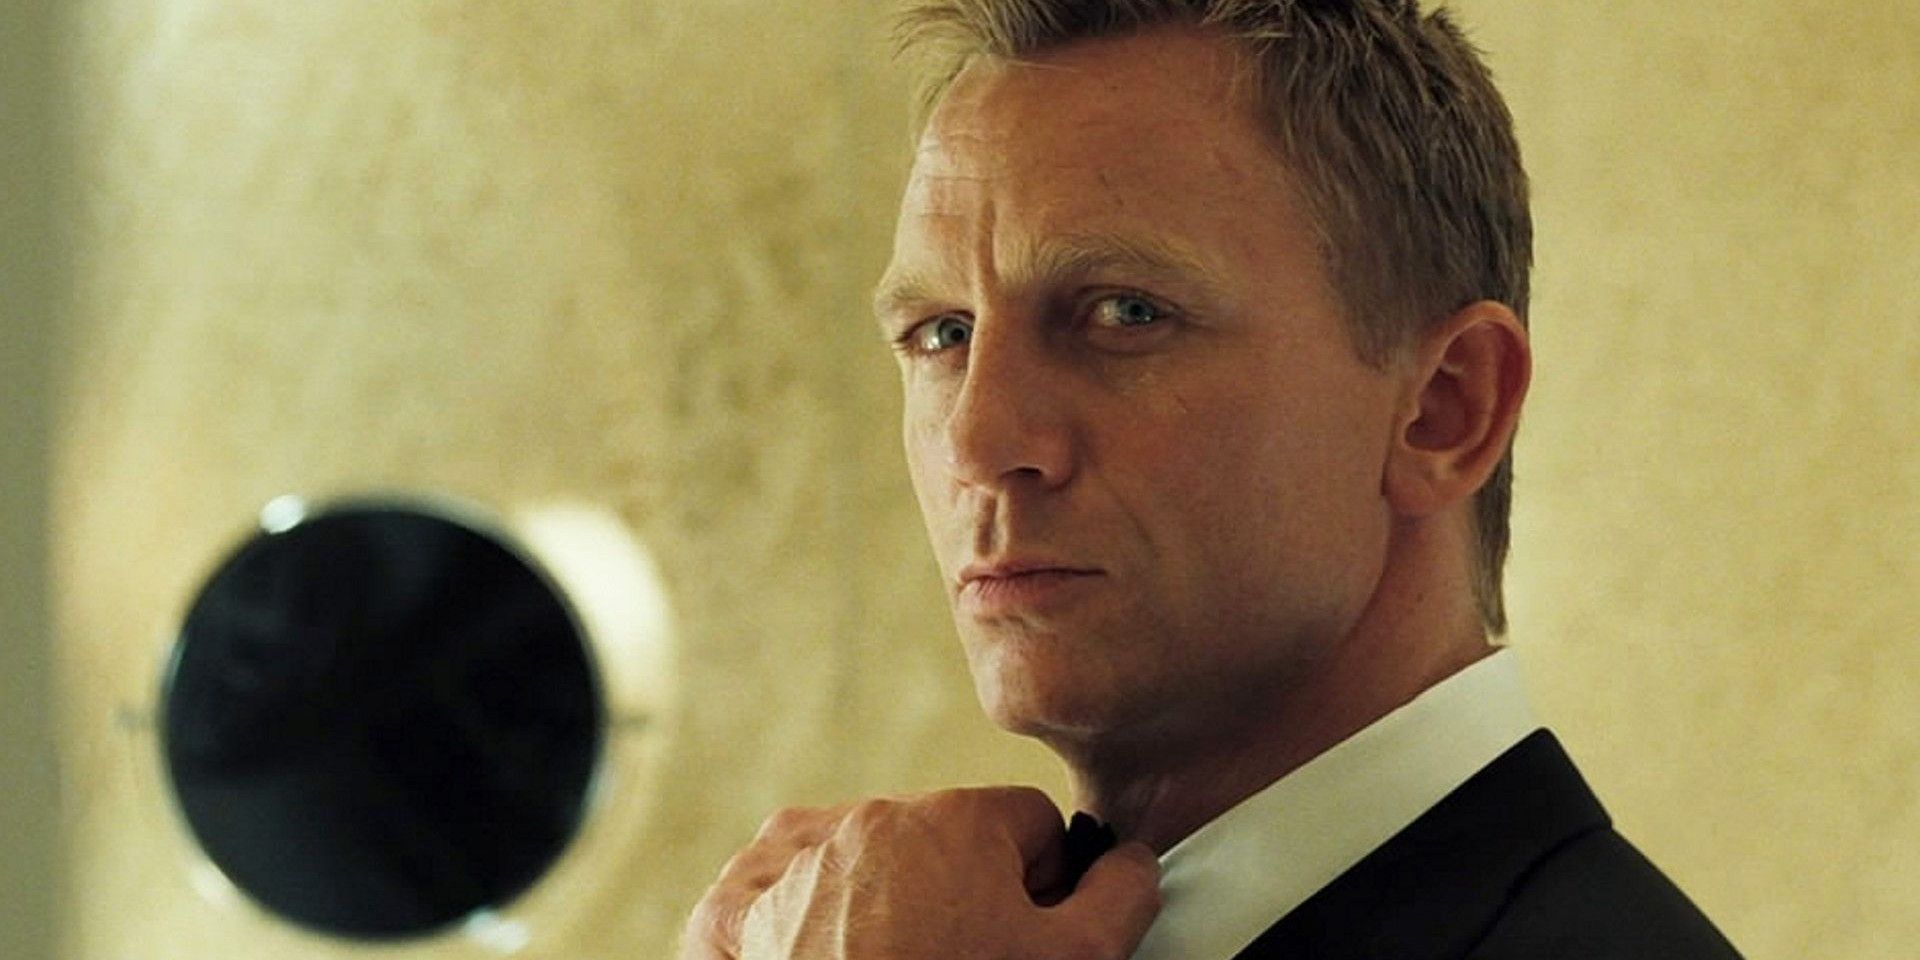 James Bond putting on a tuxedo in Casino Royale